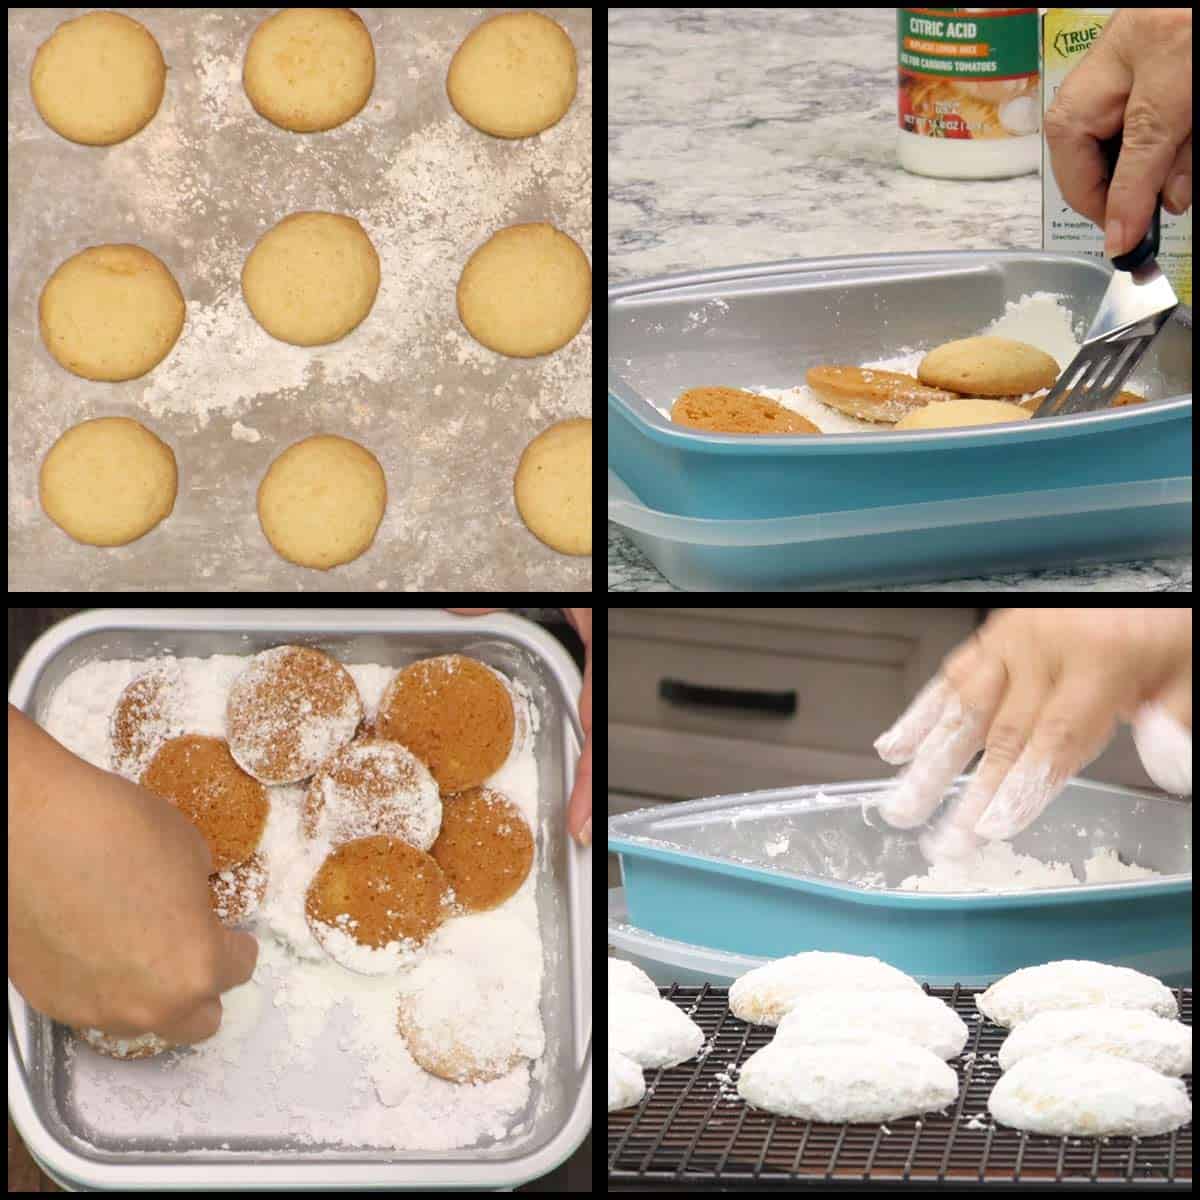 coating the lemon cooler cookies with the powdered sugar mixture.